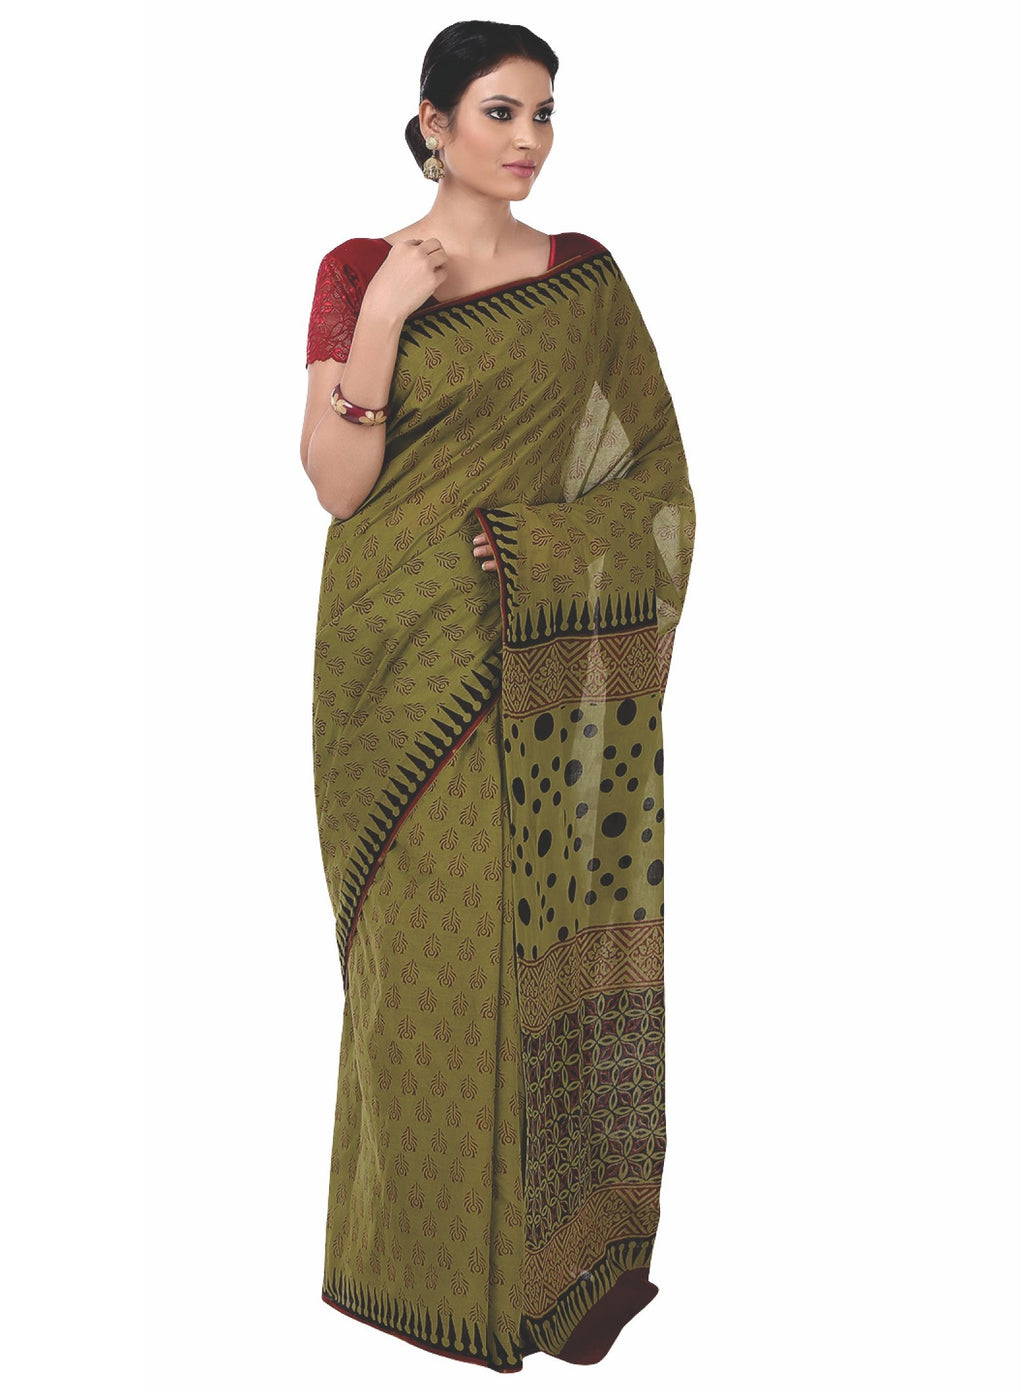 Olive Green Bagh Hand Block Print Handcrafted Cotton Saree-Saree-Kalakari India-BAPASA0046-Bagh, Cotton, Geographical Indication, Hand Blocks, Hand Crafted, Heritage Prints, Sarees, Sustainable Fabrics-[Linen,Ethnic,wear,Fashionista,Handloom,Handicraft,Indigo,blockprint,block,print,Cotton,Chanderi,Blue, latest,classy,party,bollywood,trendy,summer,style,traditional,formal,elegant,unique,style,hand,block,print, dabu,booti,gift,present,glamorous,affordable,collectible,Sari,Saree,printed, holi, Diwa